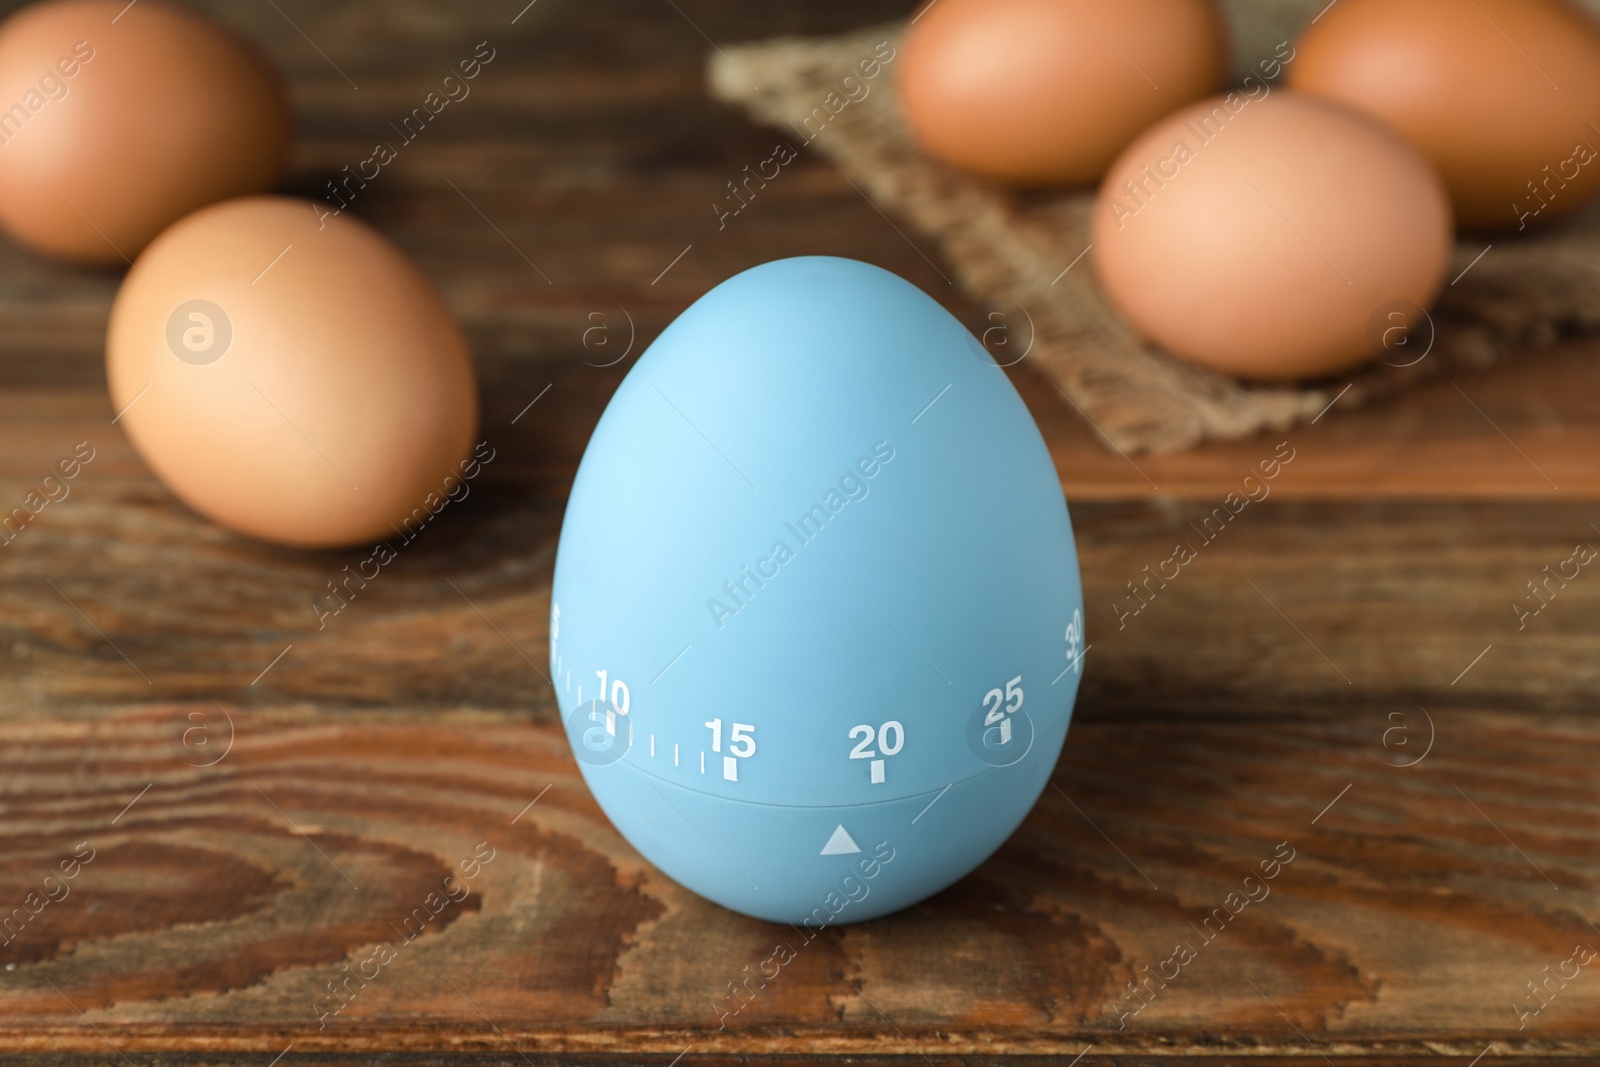 Photo of Kitchen timer and eggs on wooden table